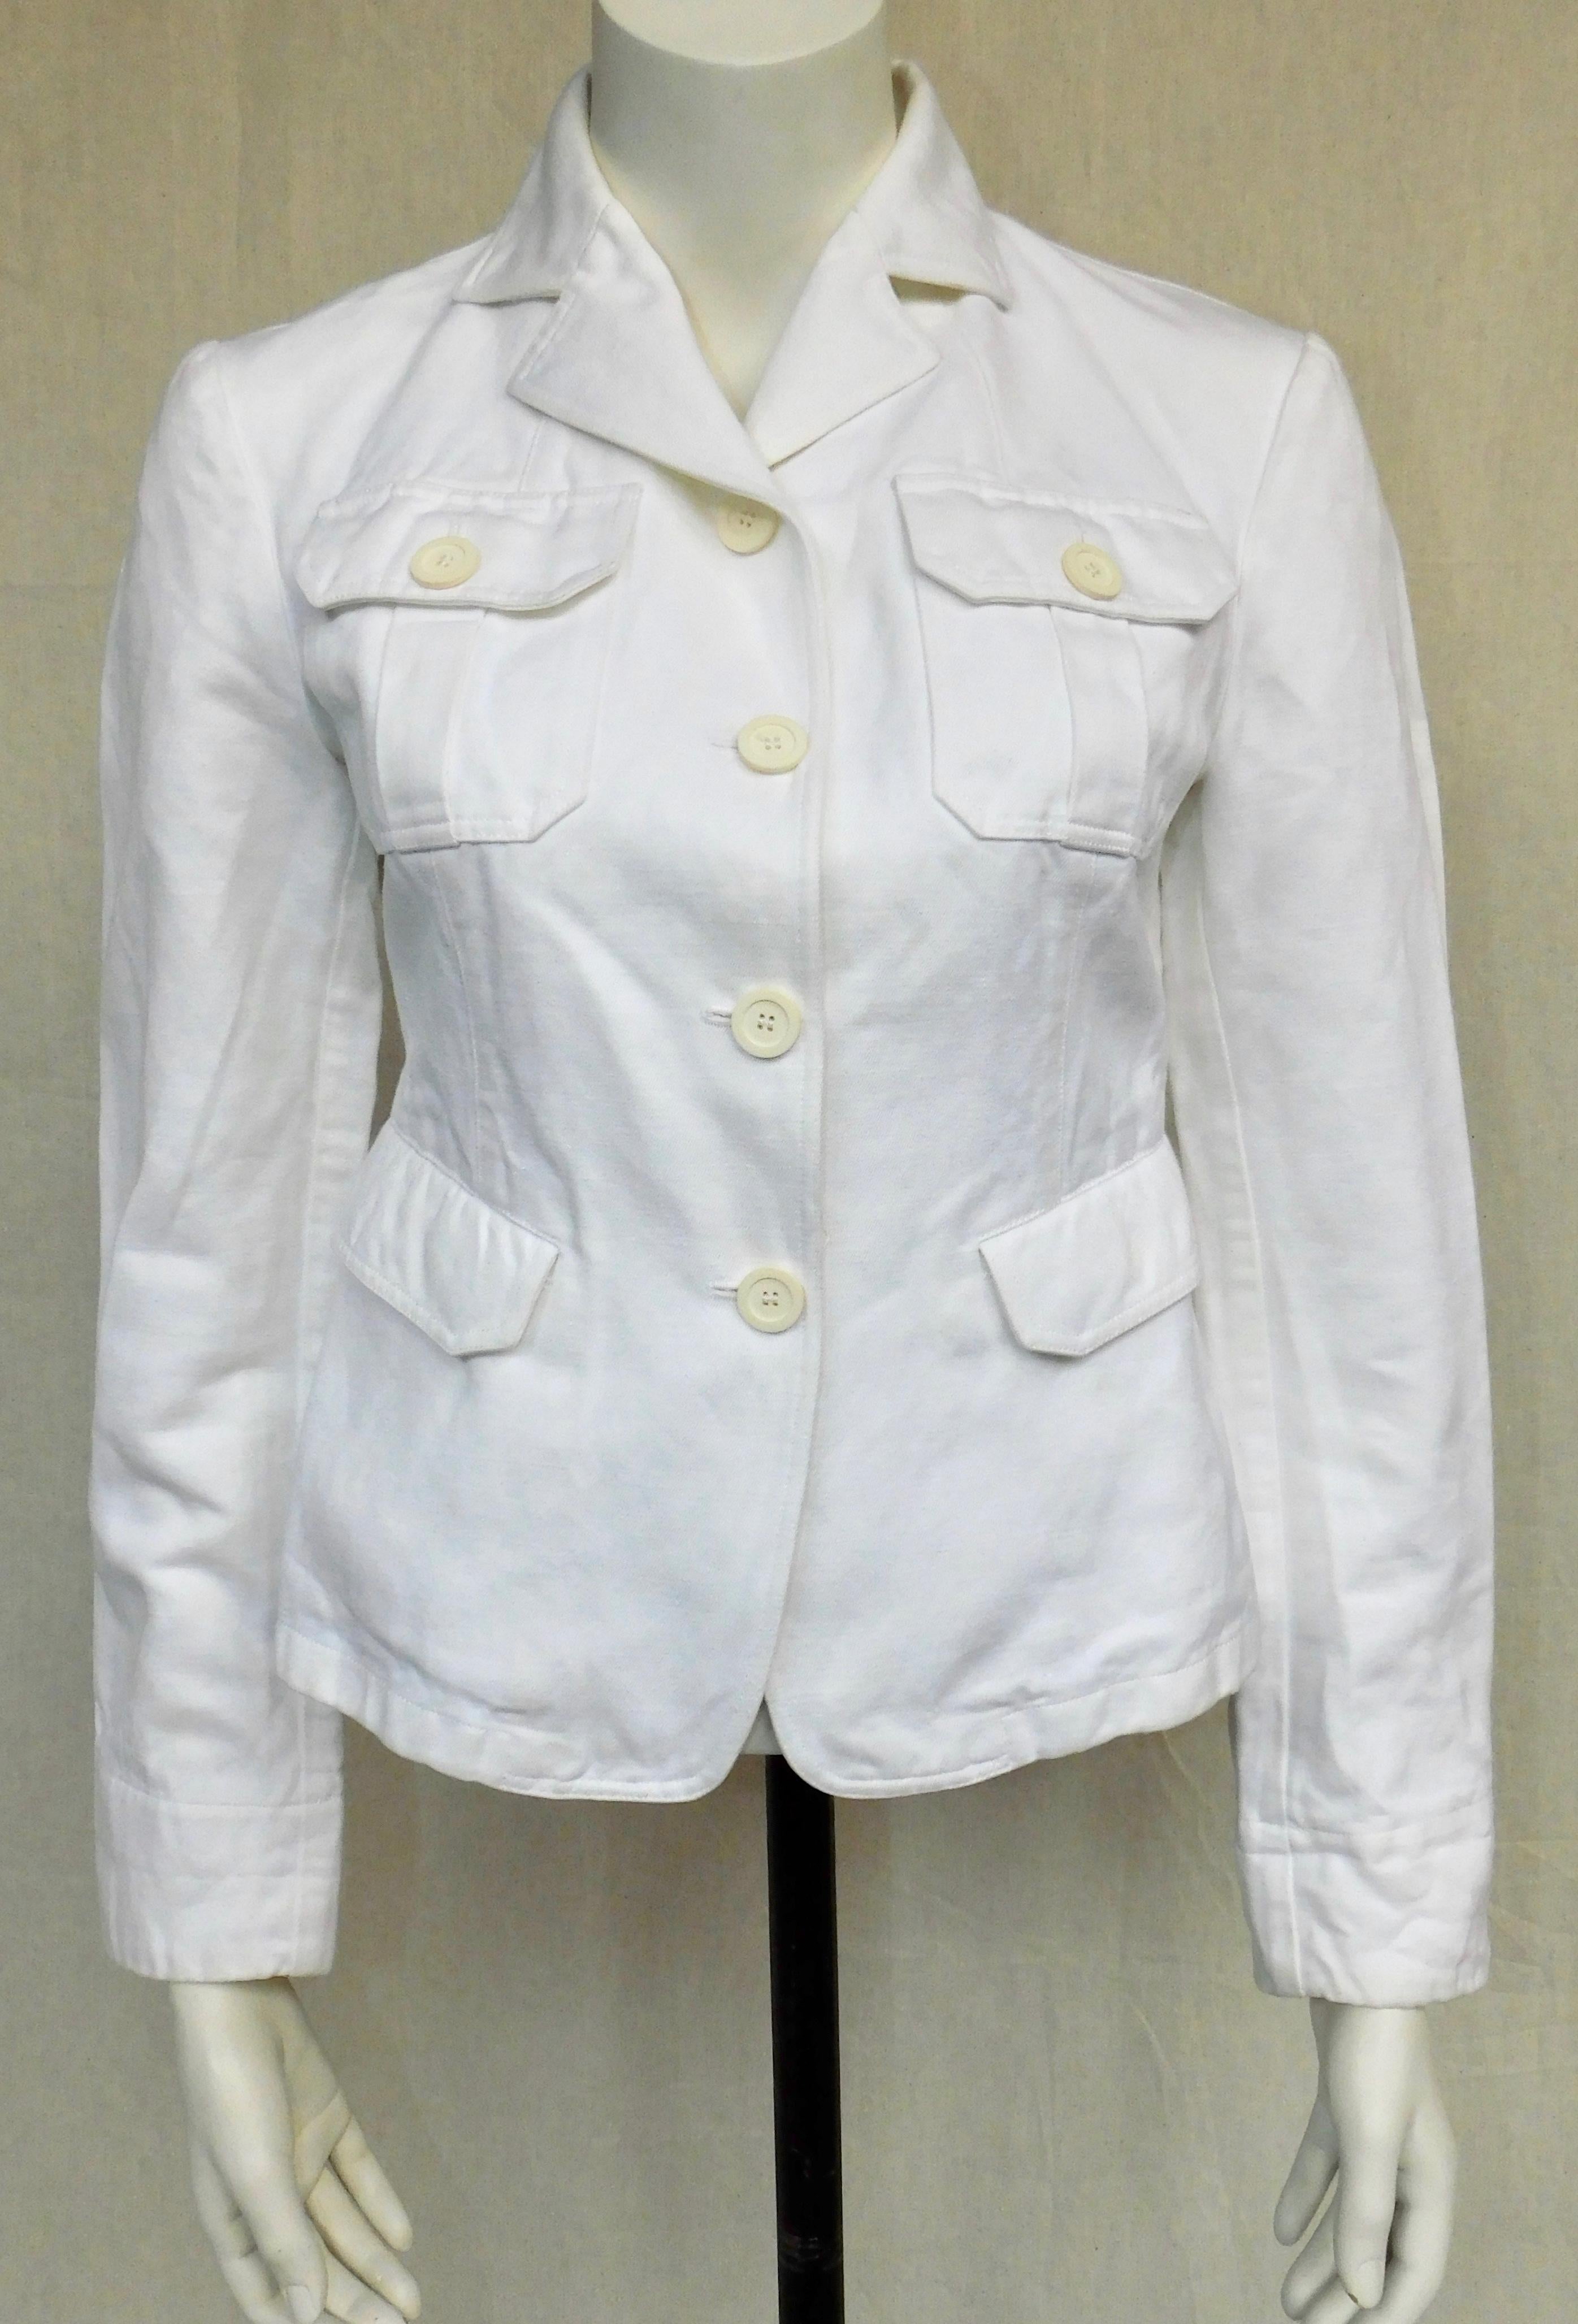 This classic white  jacket is from 2001 made from a blend of cotton and linen with the feel of soft mid-weight denim. Italian size 42 is a USA 6 or small.The shoulder width is 40 cm.
An authentic Italian made Gucci women's wear jacket made by